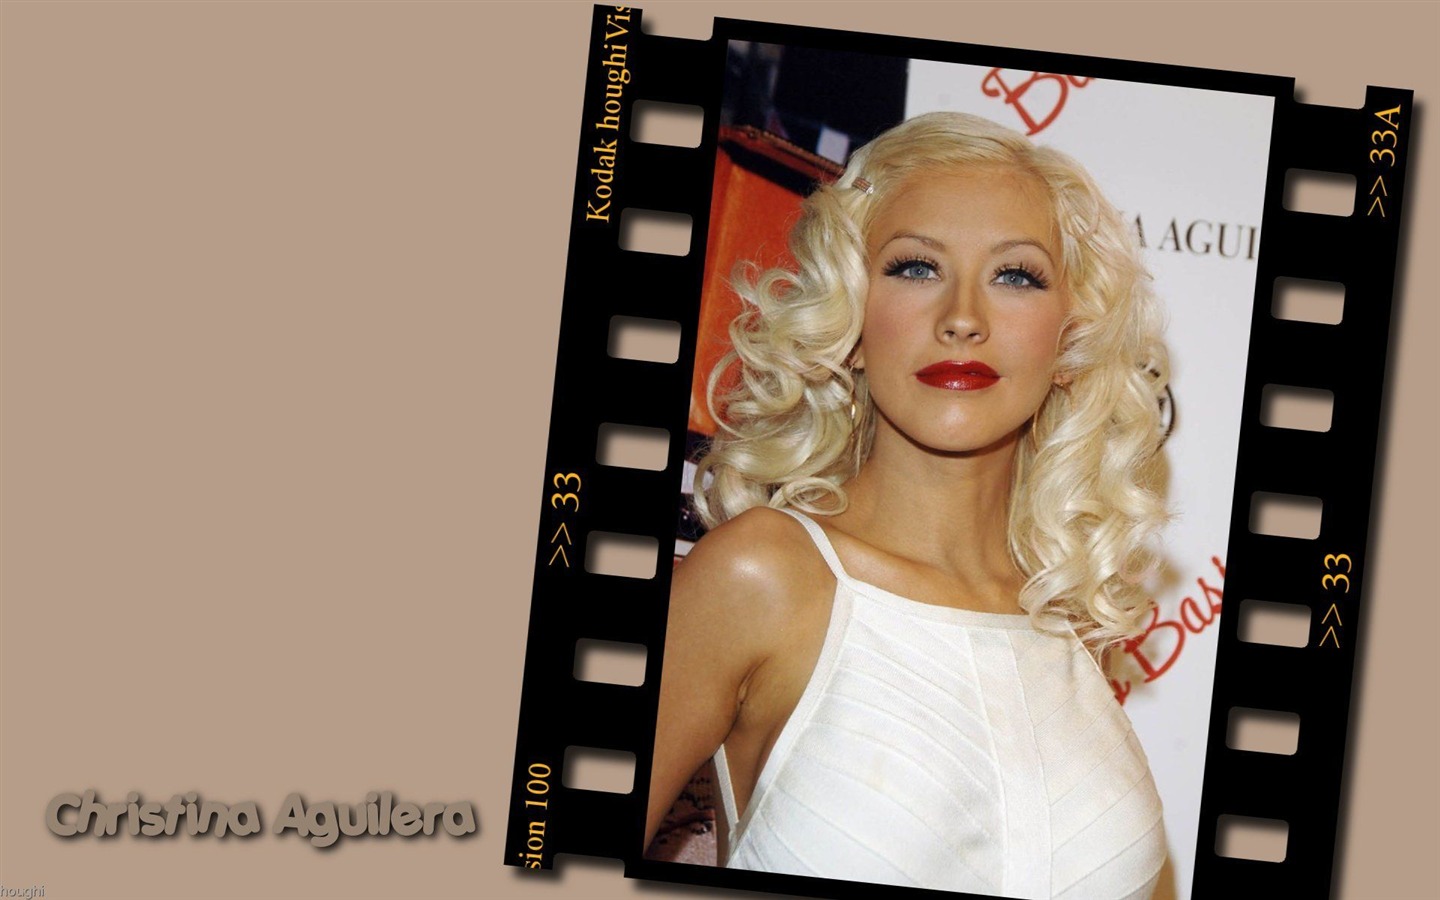 Christina Aguilera #008 - 1440x900 Wallpapers Pictures Photos Images